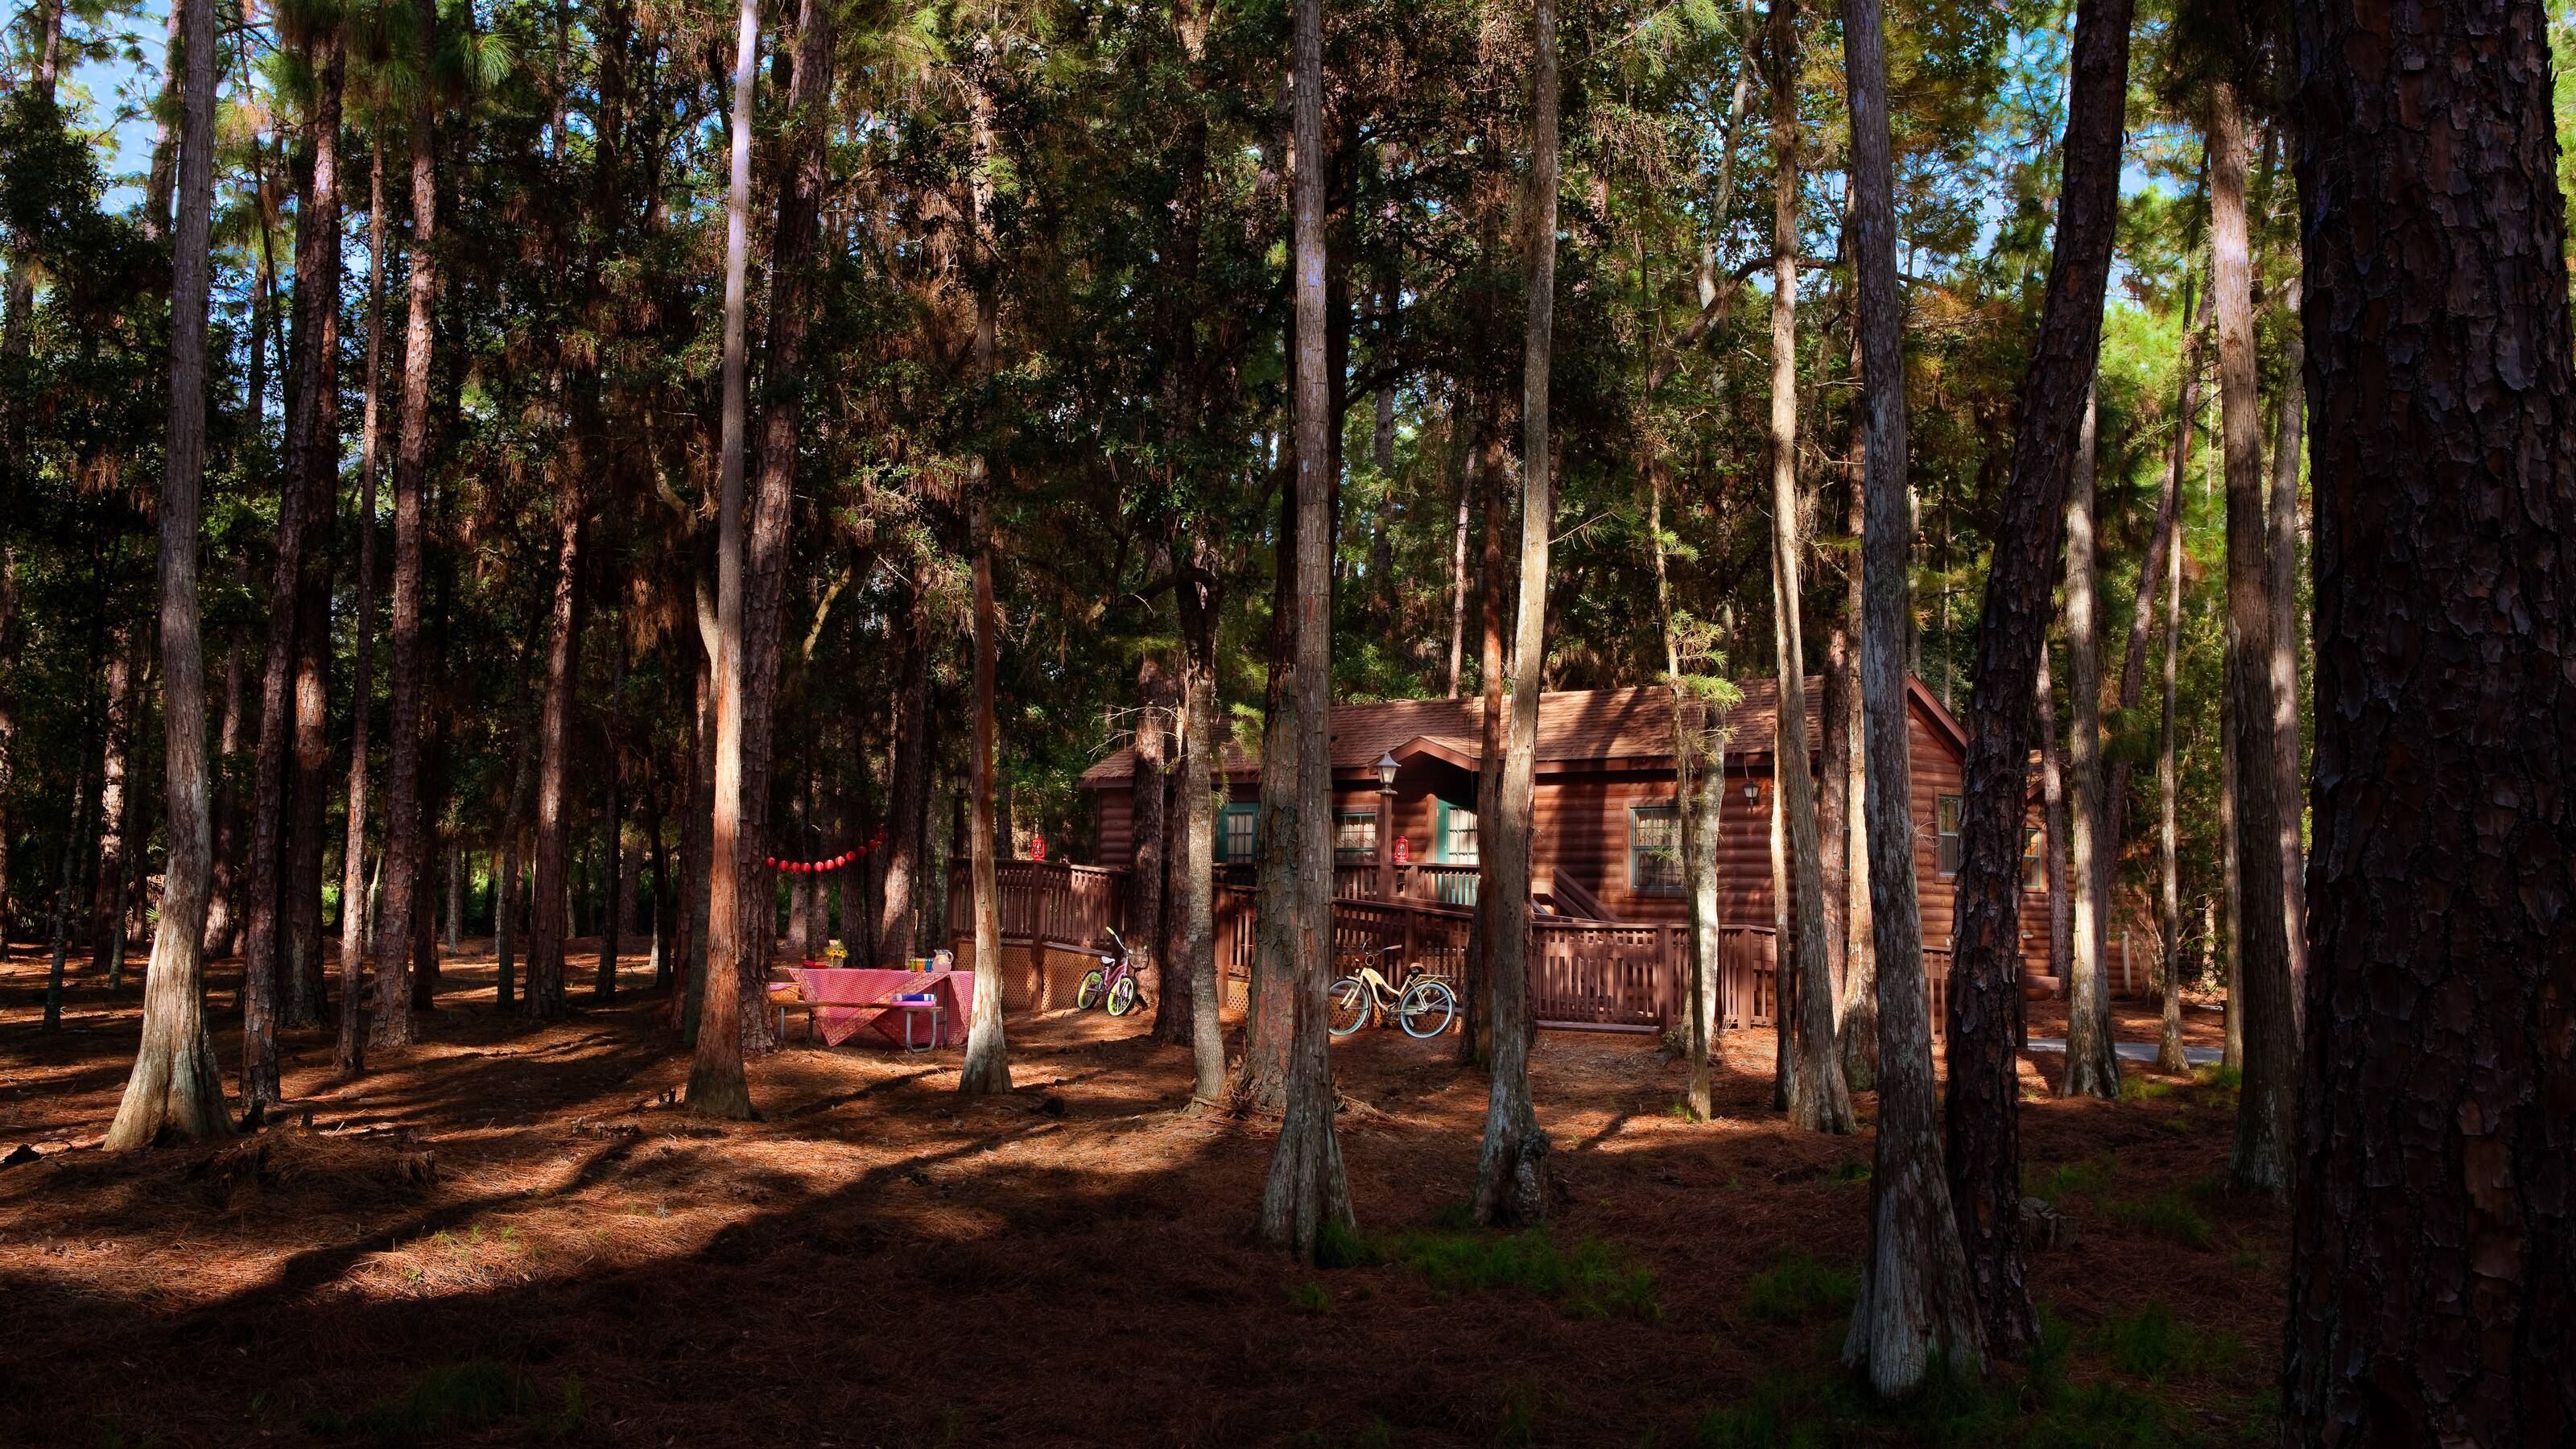 The existing Cabins at Disney's Fort Wilderness Resort will be replaced